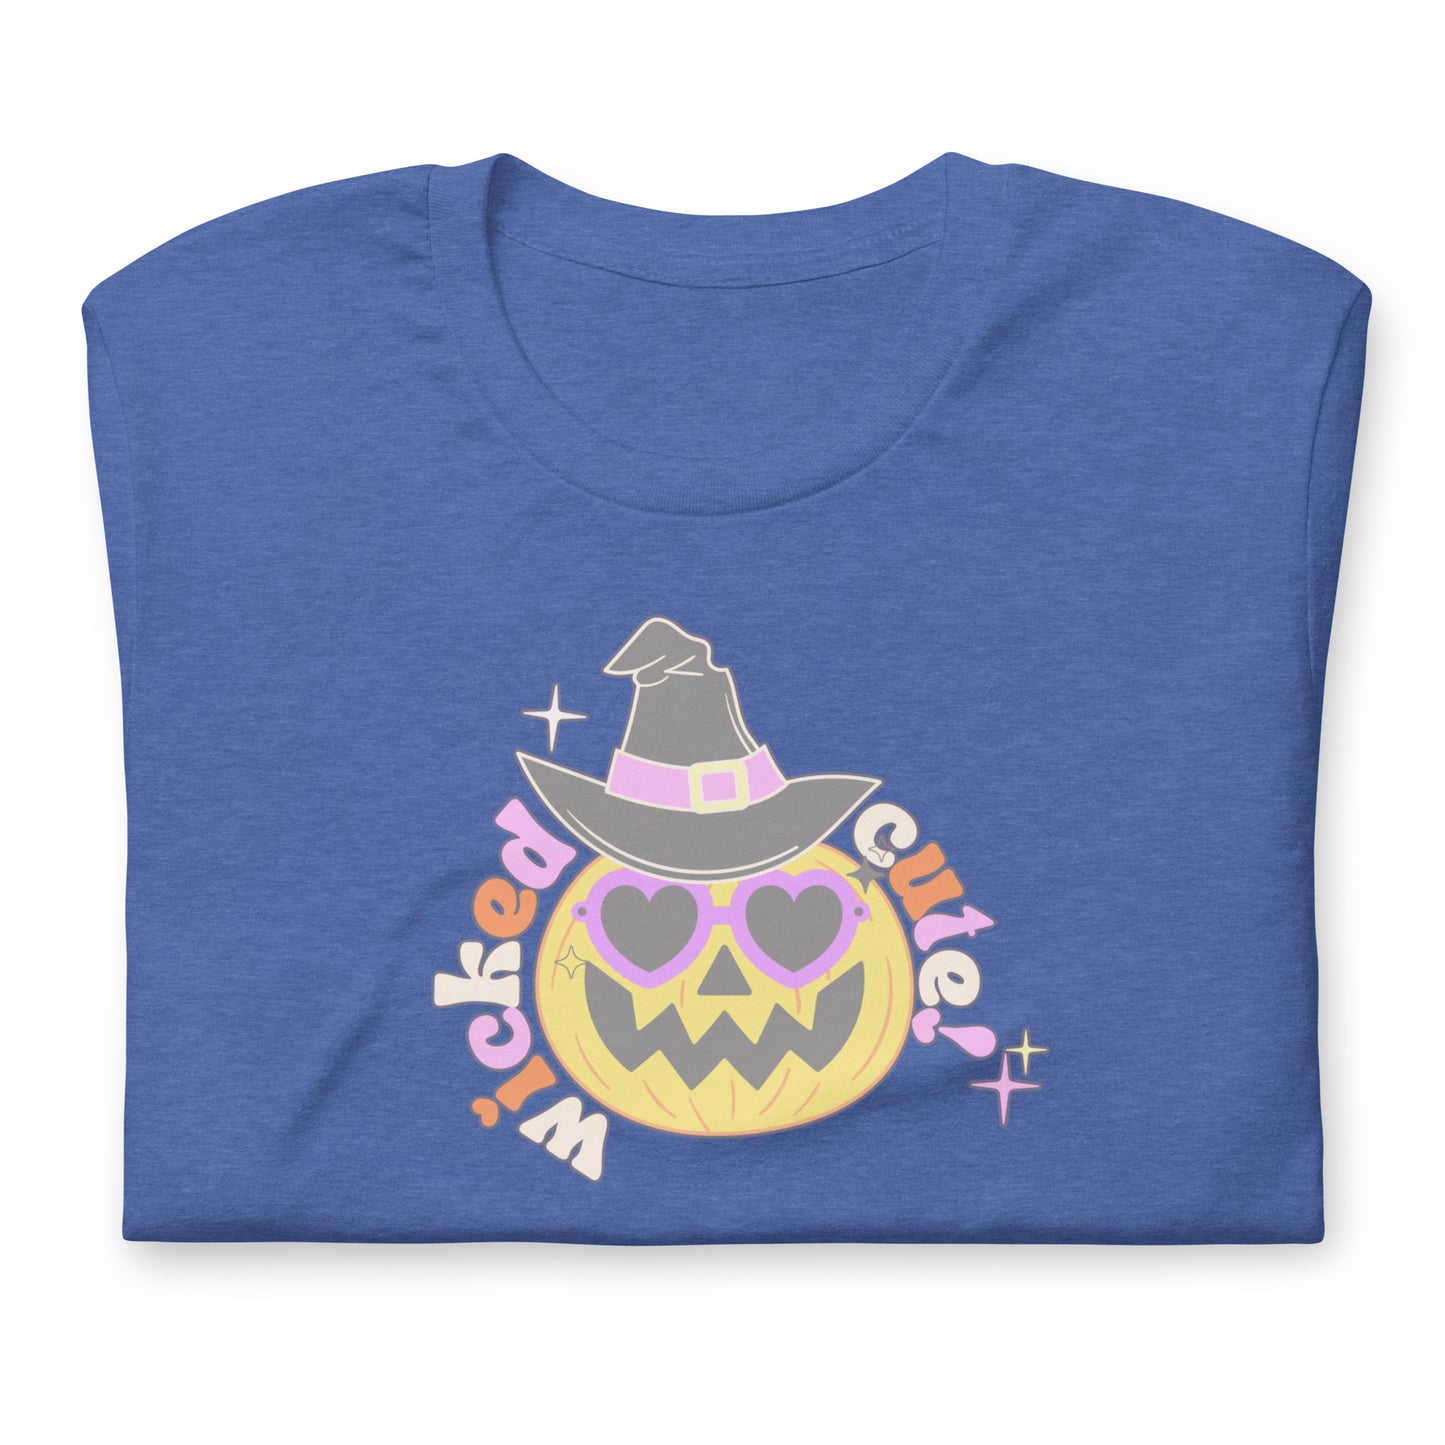 Wicked Cute t-shirt